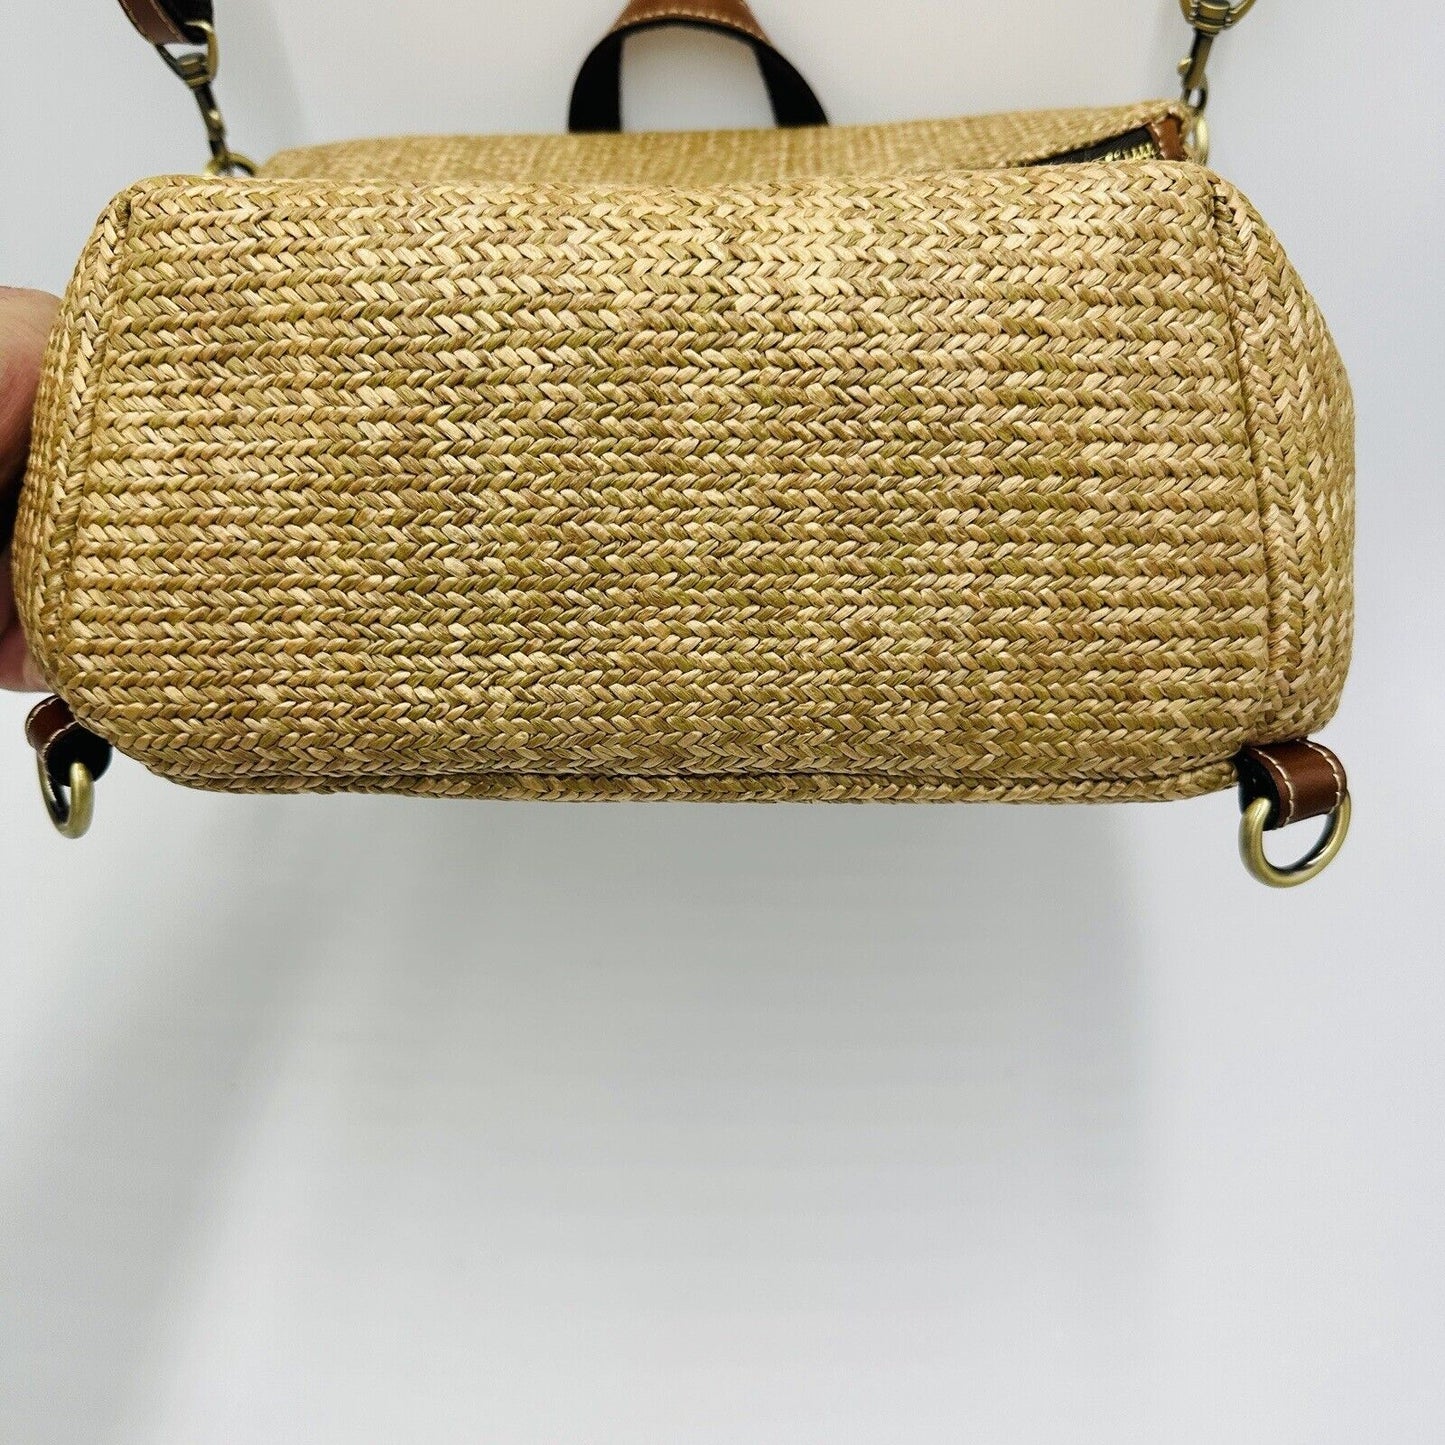 Patricia Nash Women's Purse Luzille Backpack Natural Woven Bag Handle Textured